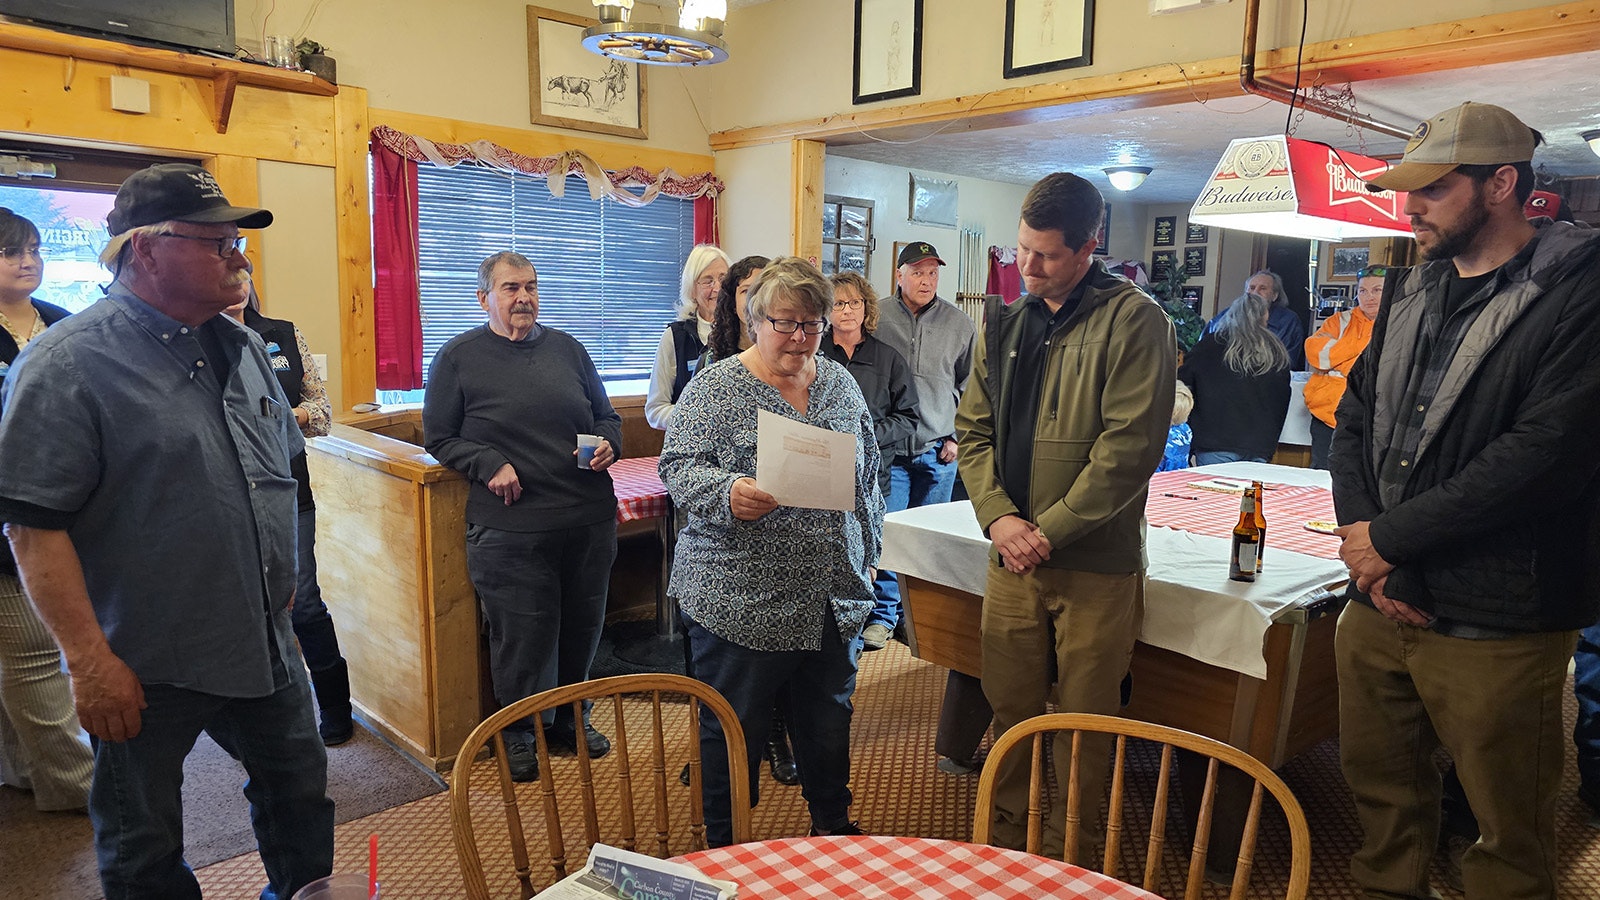 Vernon Scott, far left, looks on as his wife, Vickie, center, reads a letter she wrote to the community and to the new owners of The Virginian Hotel, Aaron Mumford, second from right, and Jesse Baker, far right.